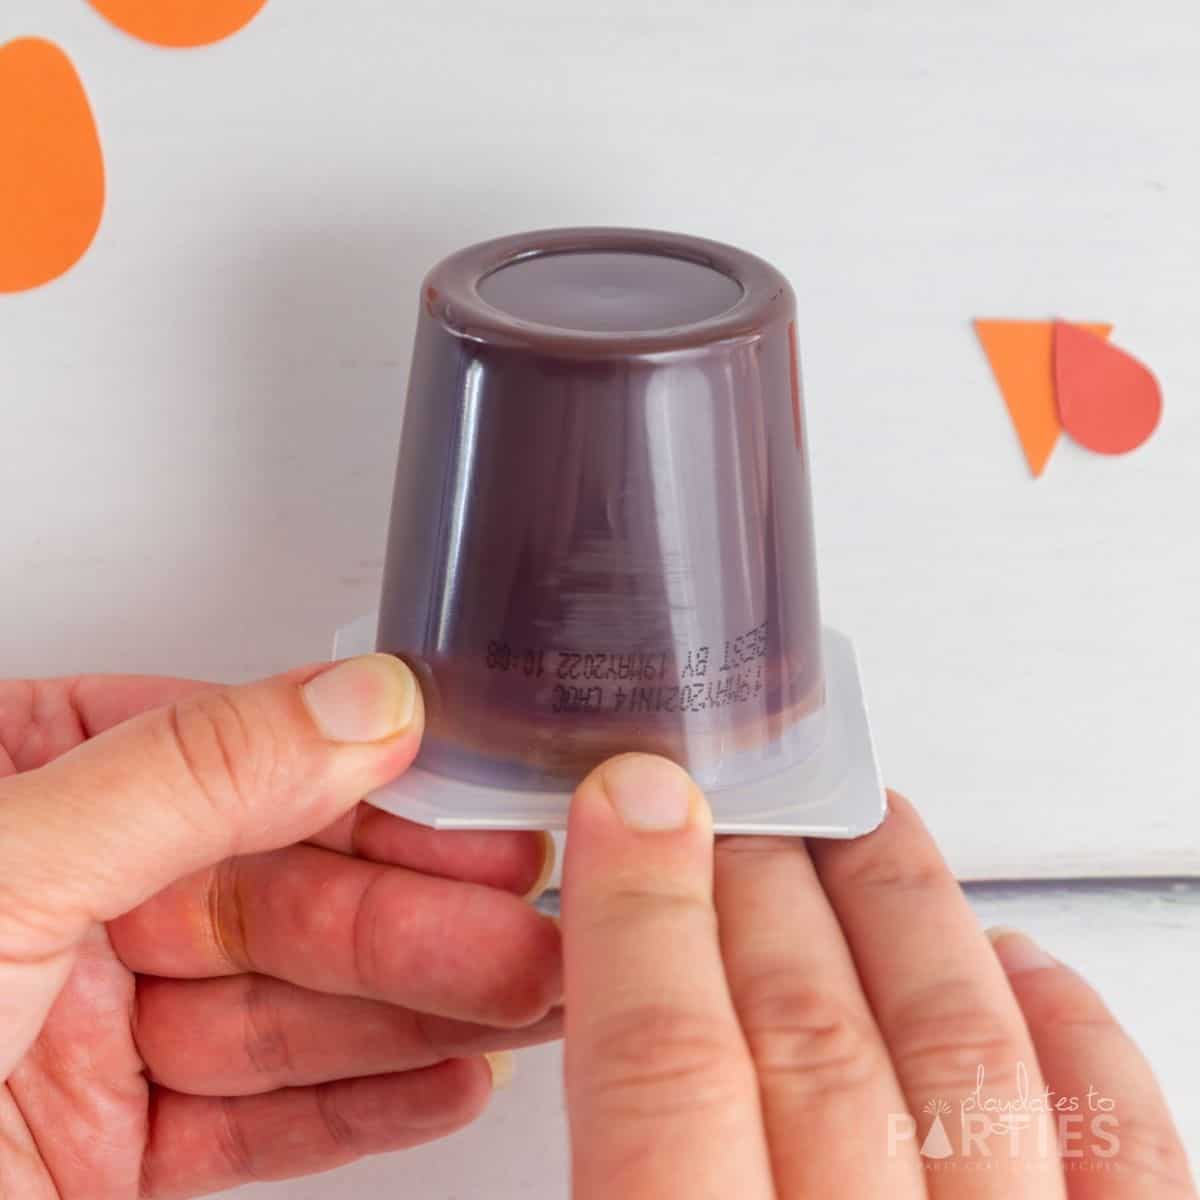 A woman's hand pointing to printed information on a pudding cup.